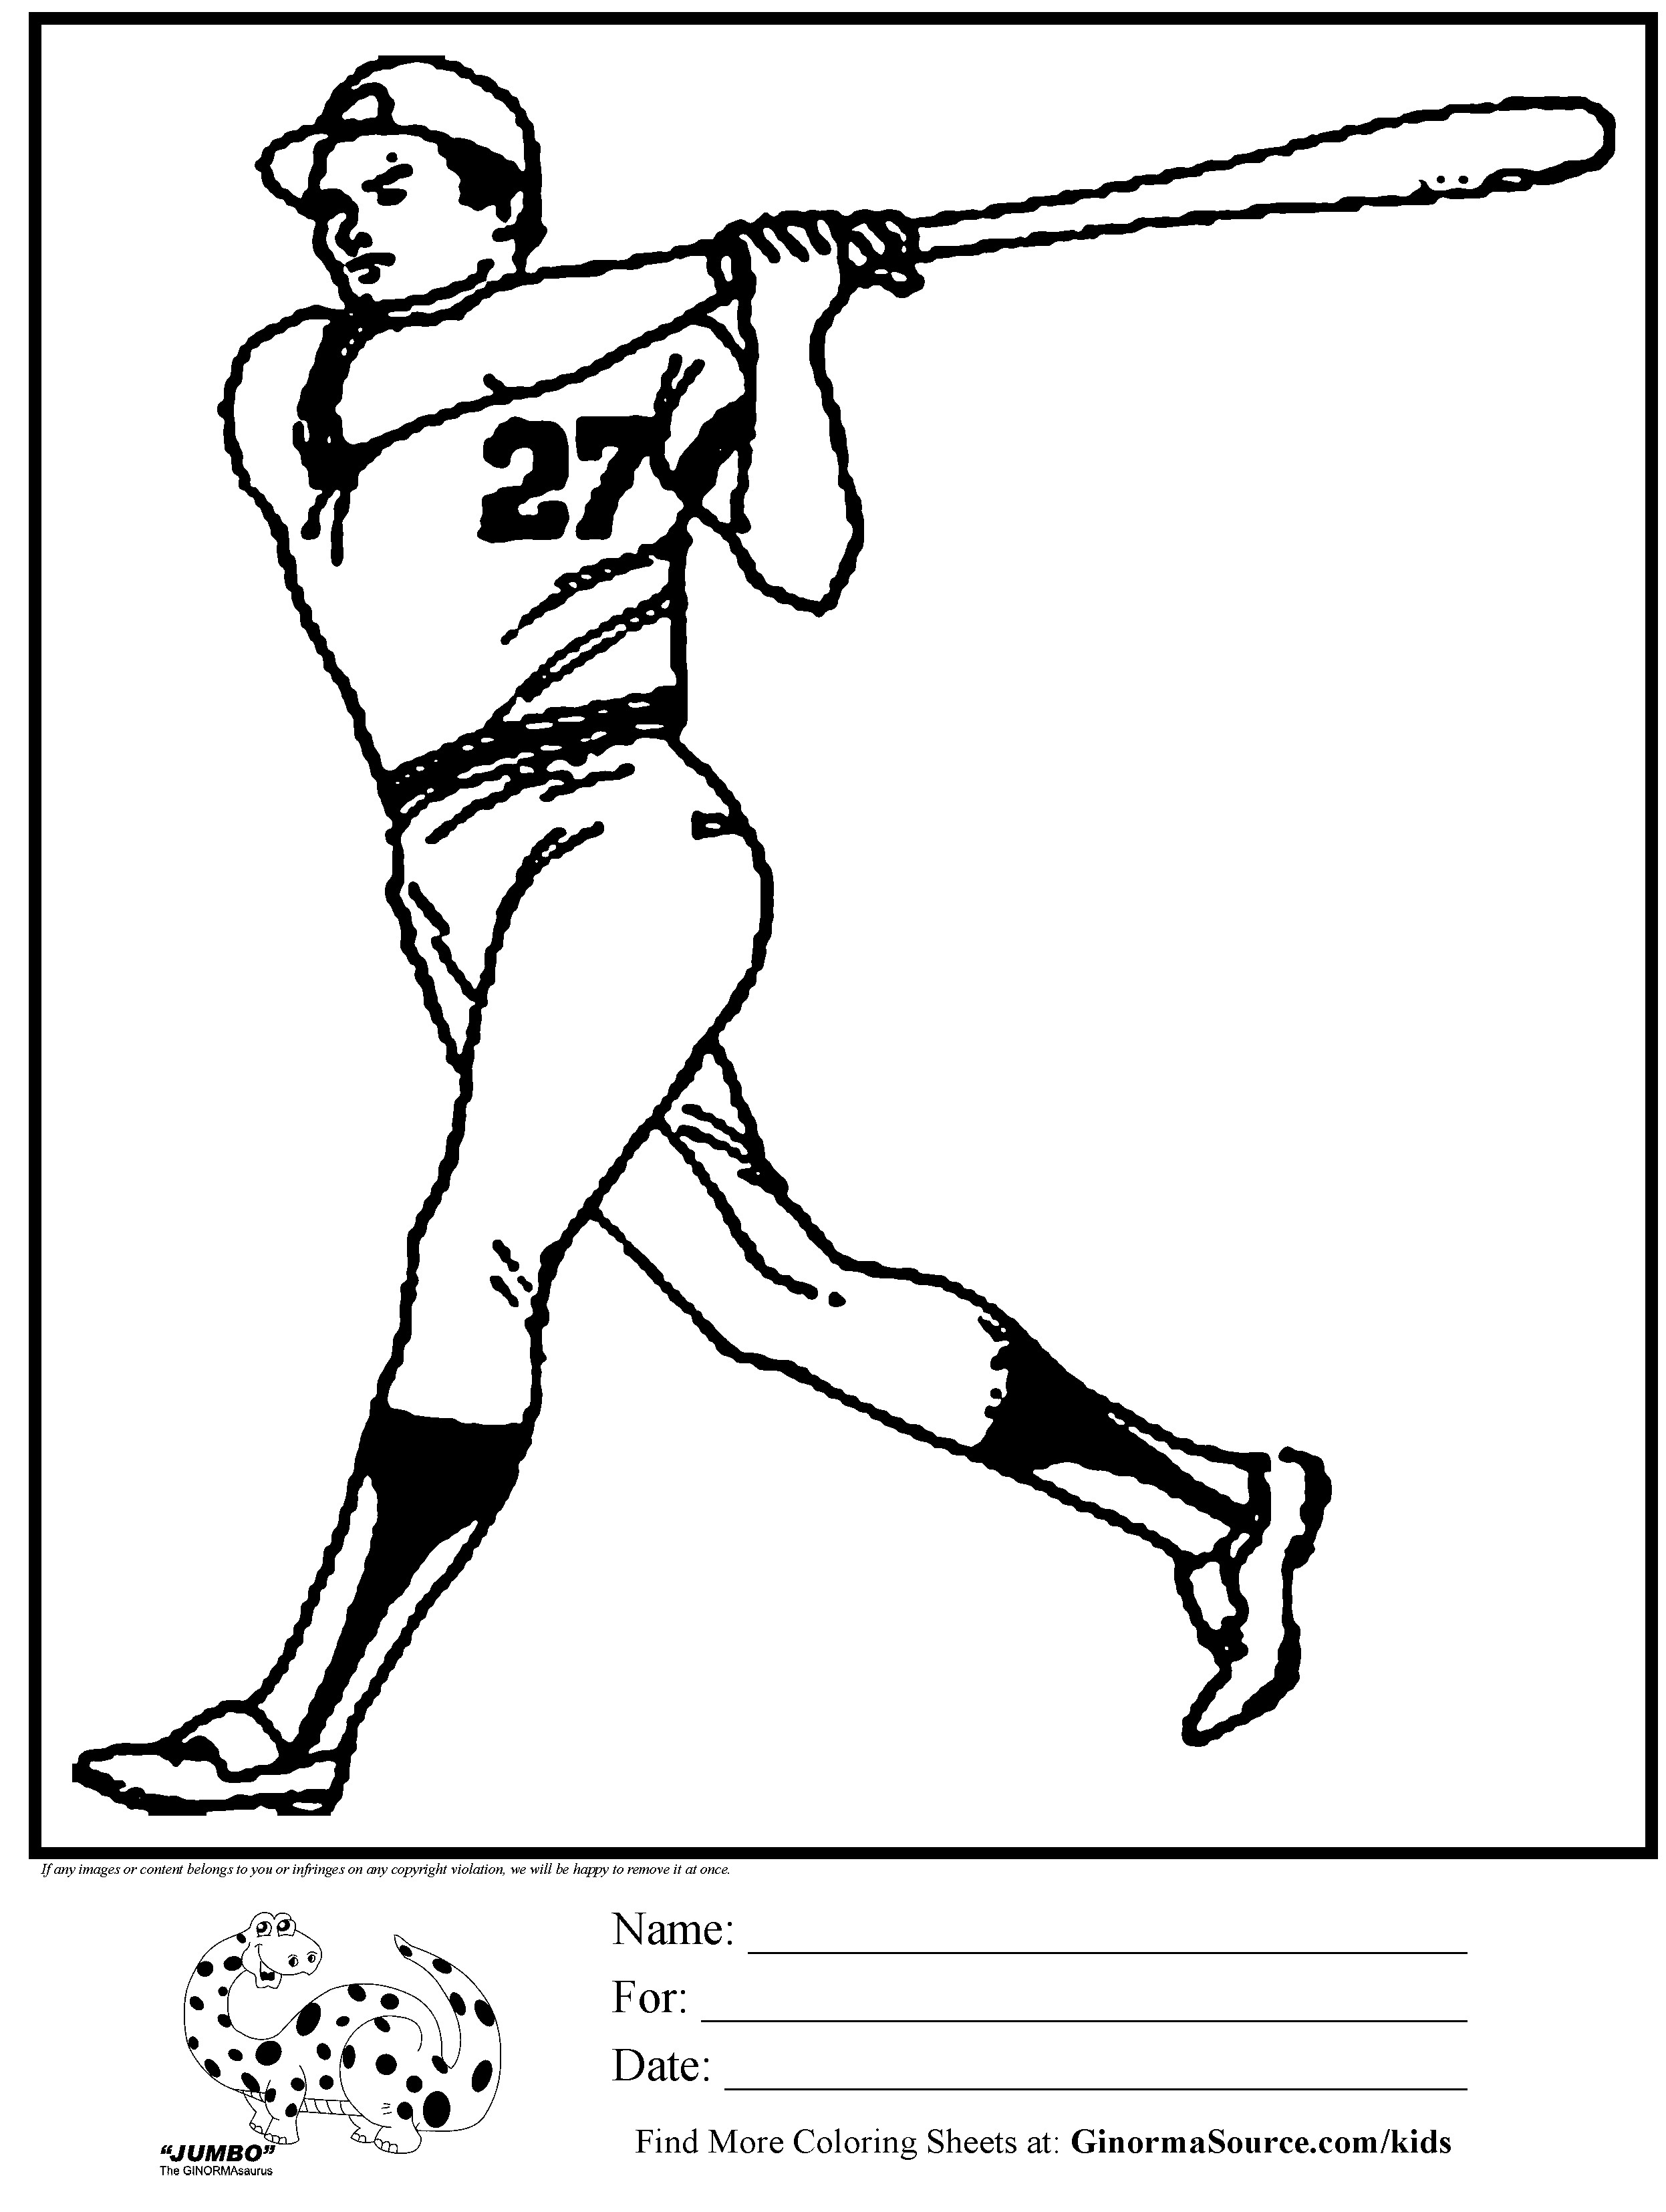 Coloring Pages For Boys Baseball
 coloring page for boys baseball batter